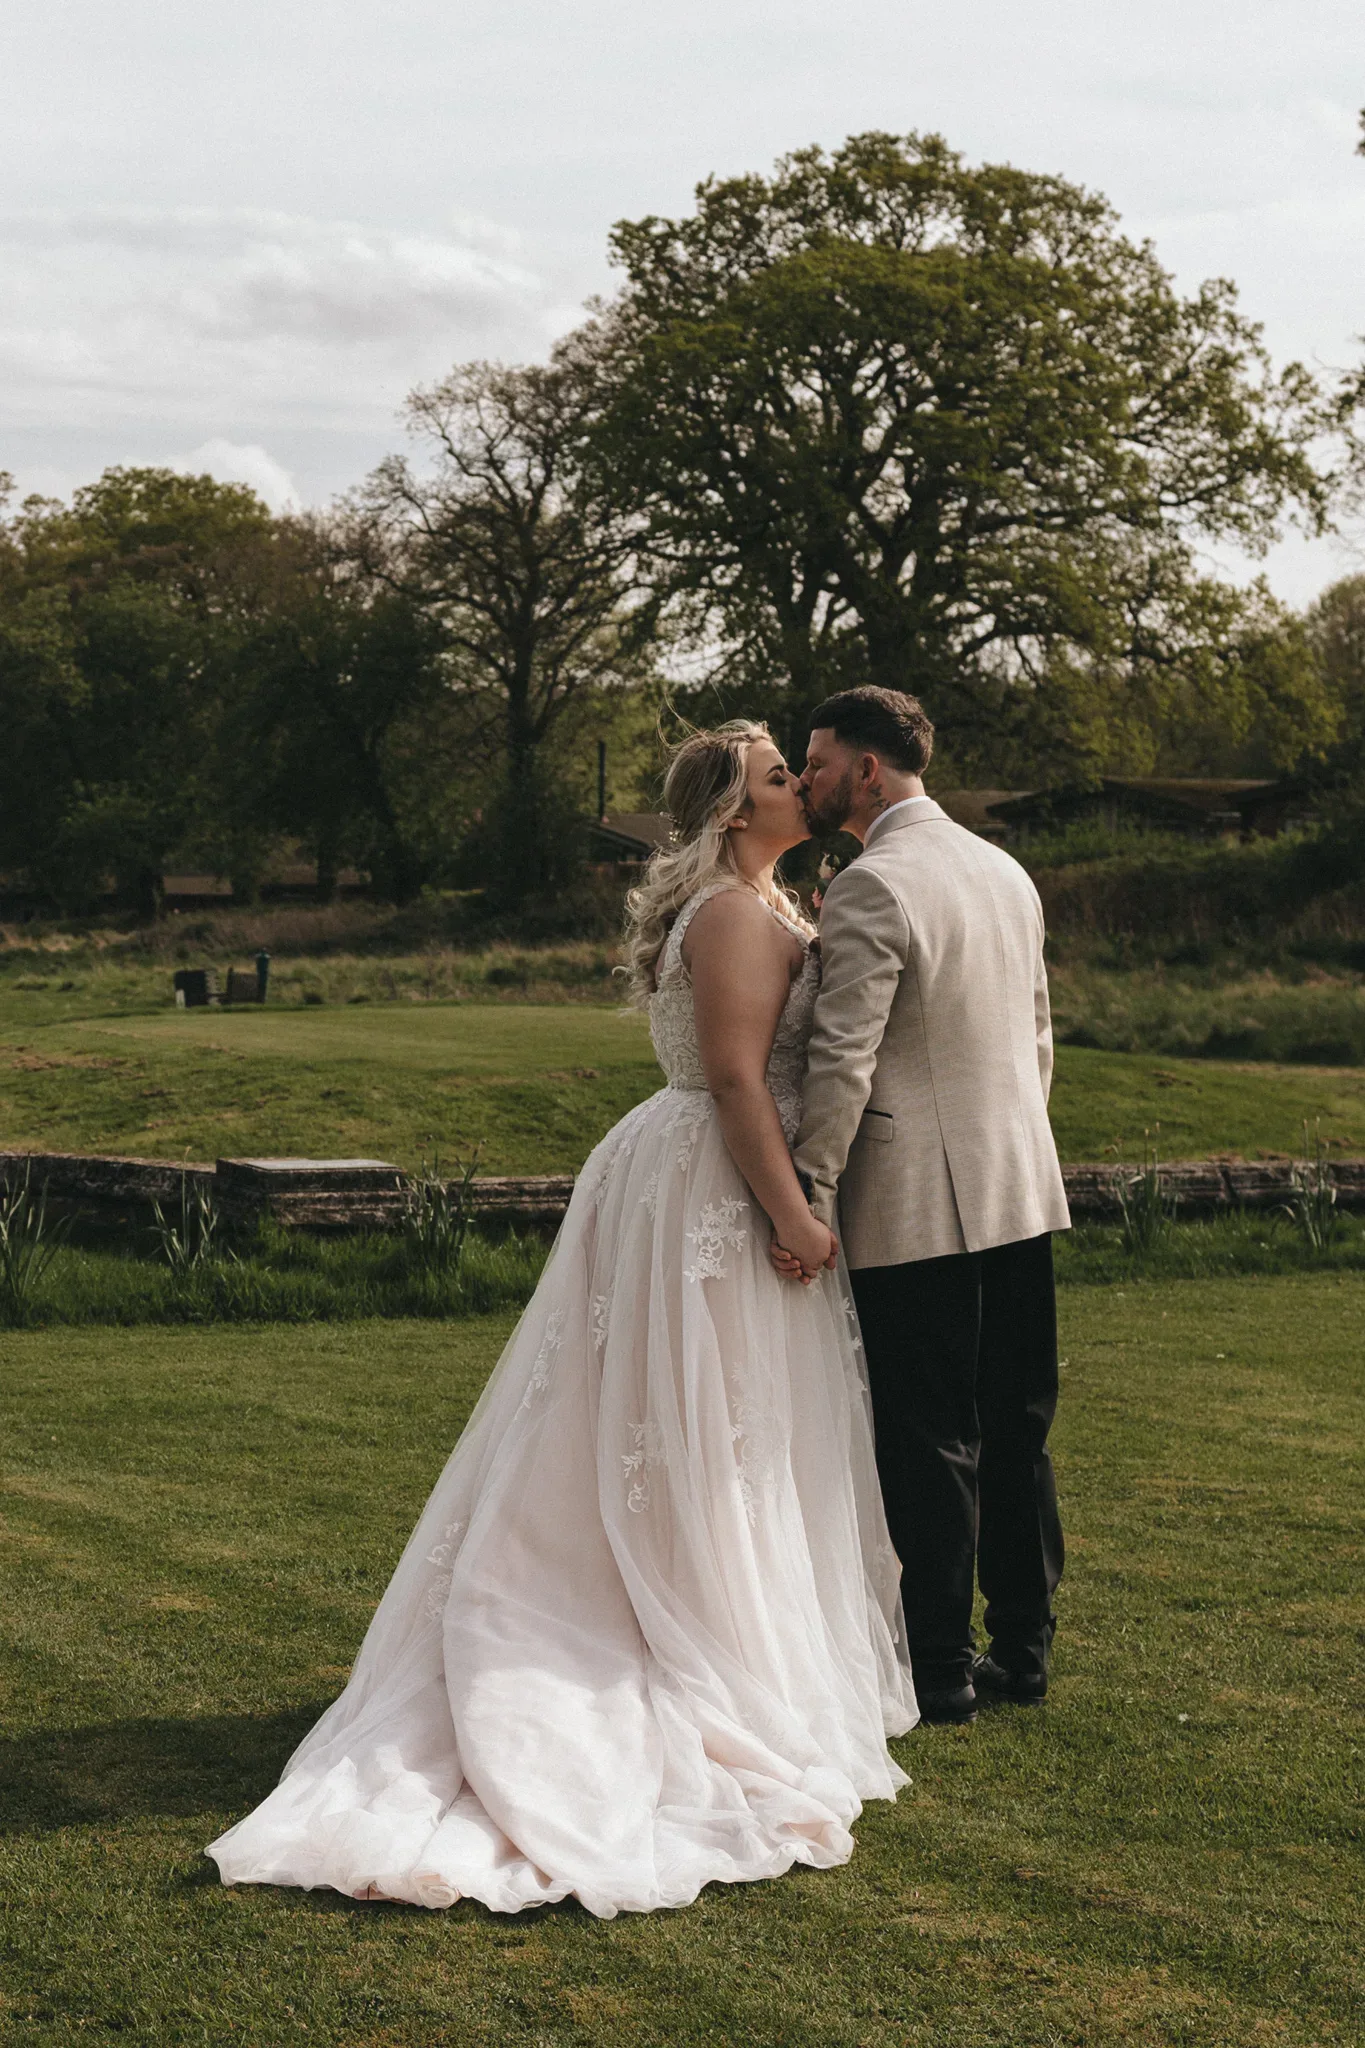 A bride and groom share a kiss in a lush, green meadow. the bride wears a flowing white dress with lace detail, and the groom is in a beige suit. large trees and a clear sky form the backdrop.